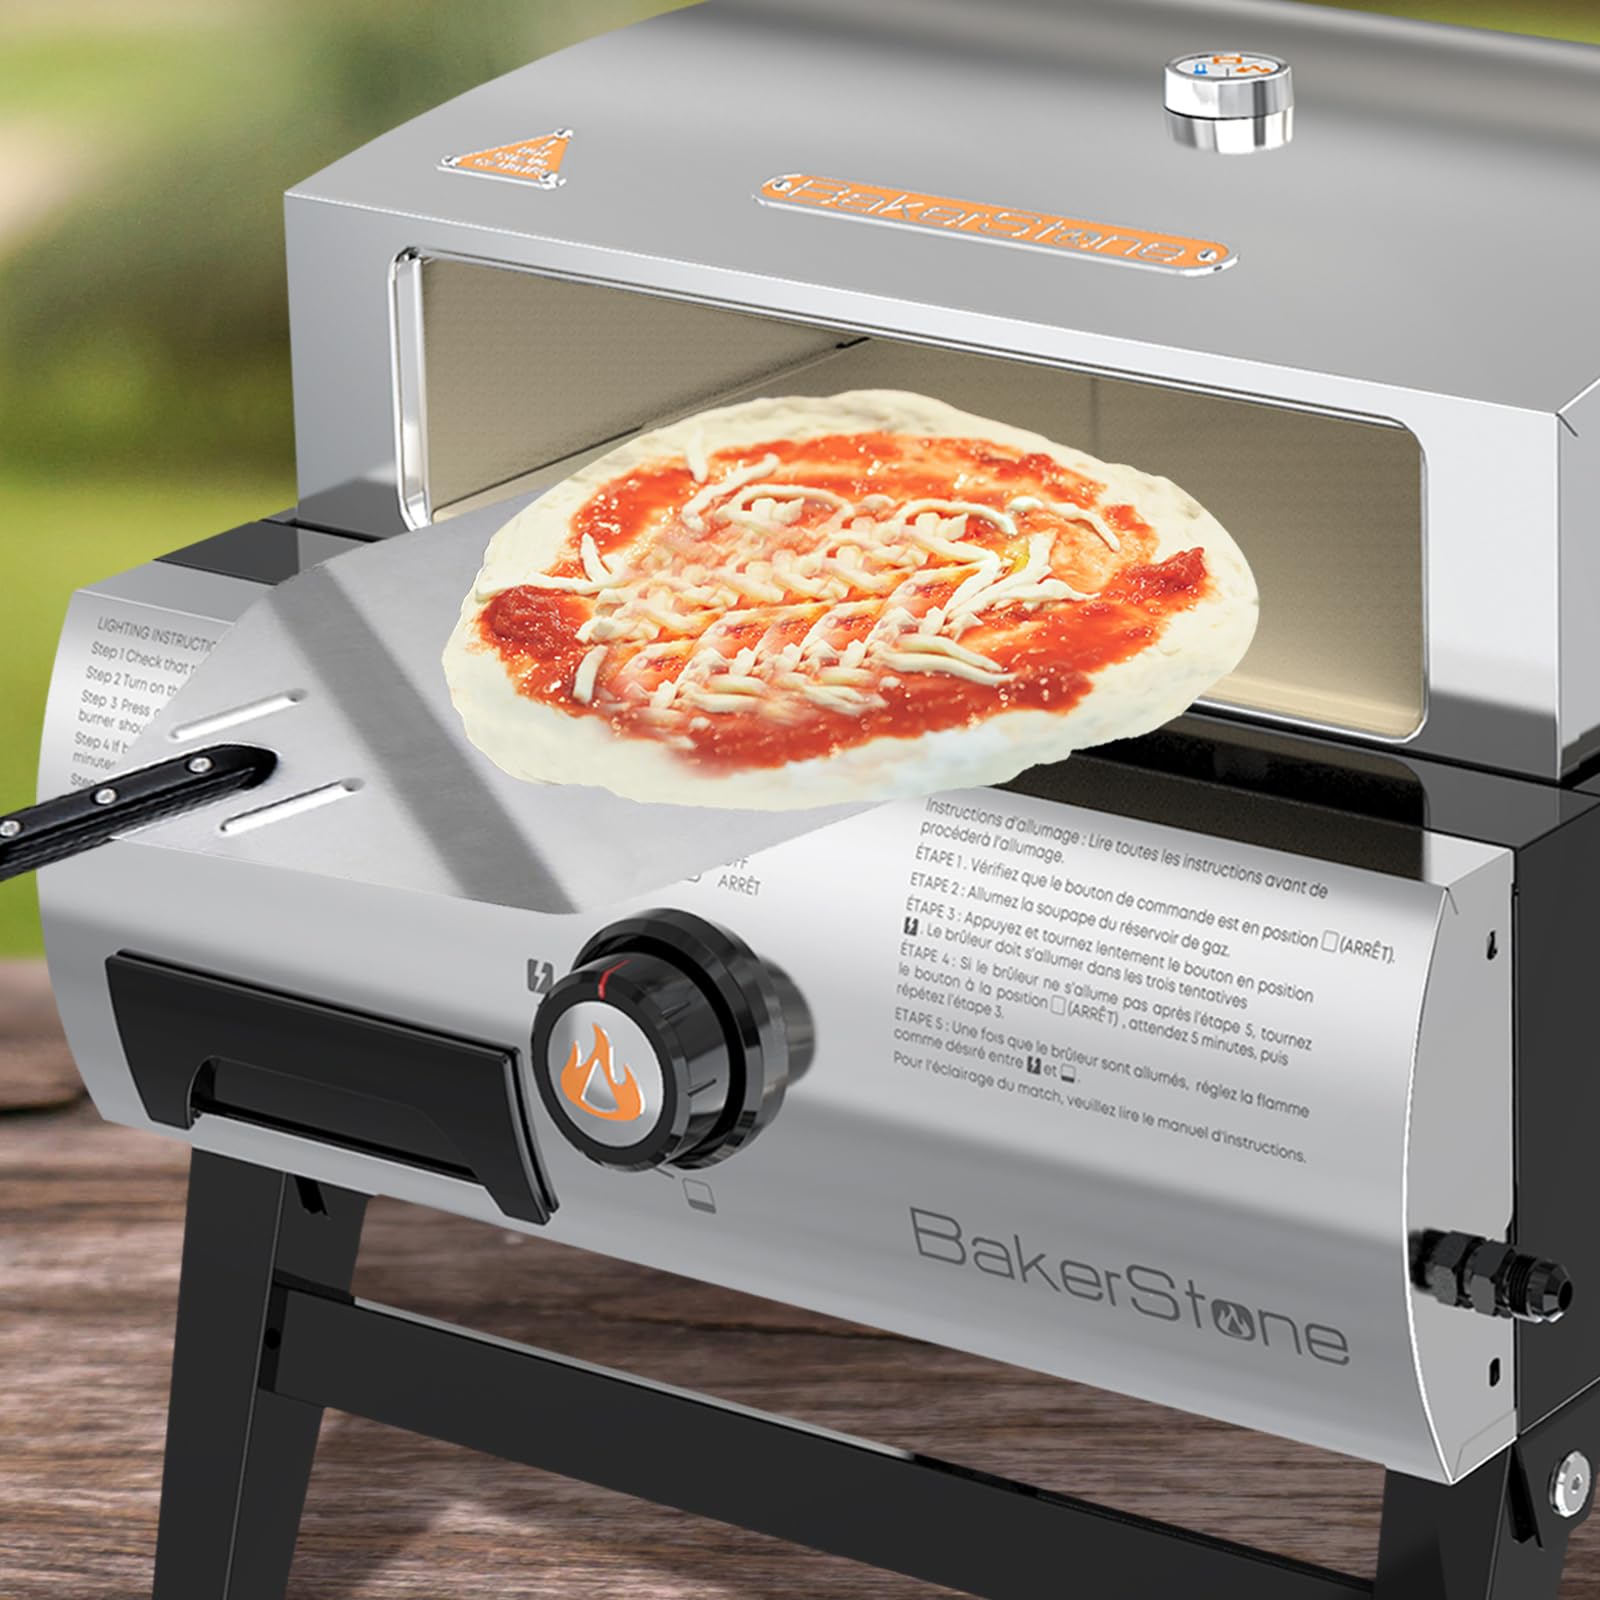 BakerStone Pizza Oven with Portable Gas Grill Outdoor Propane Pizza Ovens Camping Grill Kit with Baking Tray, Steel Pizza Peel/Paddle, Pizza Turner, Cutter